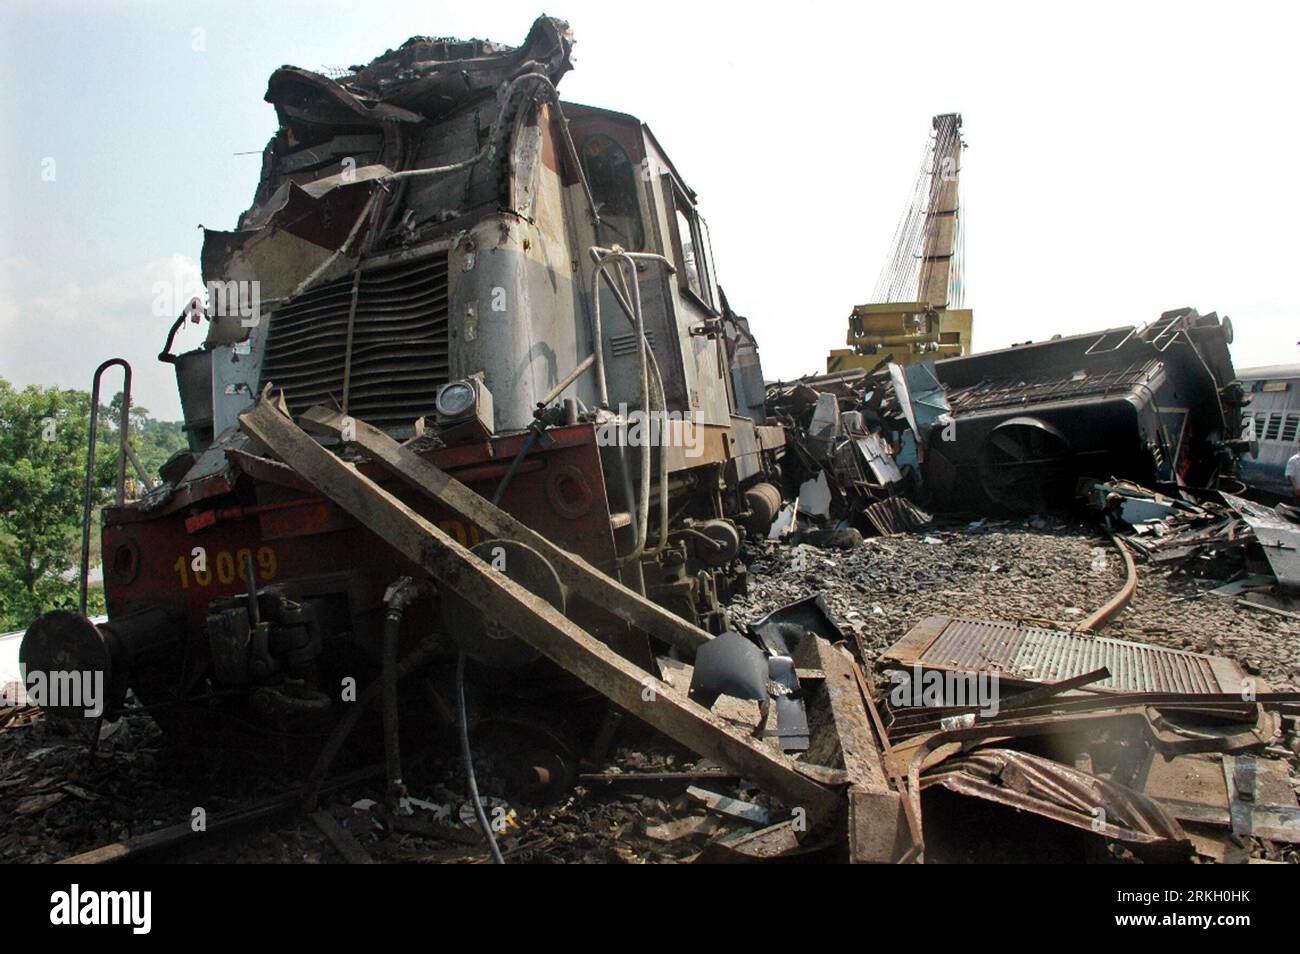 Bildnummer: 55672402  Datum: 31.07.2011  Copyright: imago/Xinhua (110801) -- CALCUTTA, Aug. 1, 2011 (Xinhua) -- Wrecked passenger carriages are seen at the site of a train accident scene at Jamirghata, some 350km away from Calcutta, capital of eastern Indian state West Bengal on July, 31, 2011. The death toll in the train collision Sunday evening in the eastern Indian state West Bengal has risen to three while 50 others were injured, said railway officials on Monday. (Xinhua Photo/Tumpa Mondal)(axy) INDIA-WEST BENGAL-TRAIN CRASH PUBLICATIONxNOTxINxCHN Gesellschaft Zugunglück Unglück Unfall Kra Stock Photo